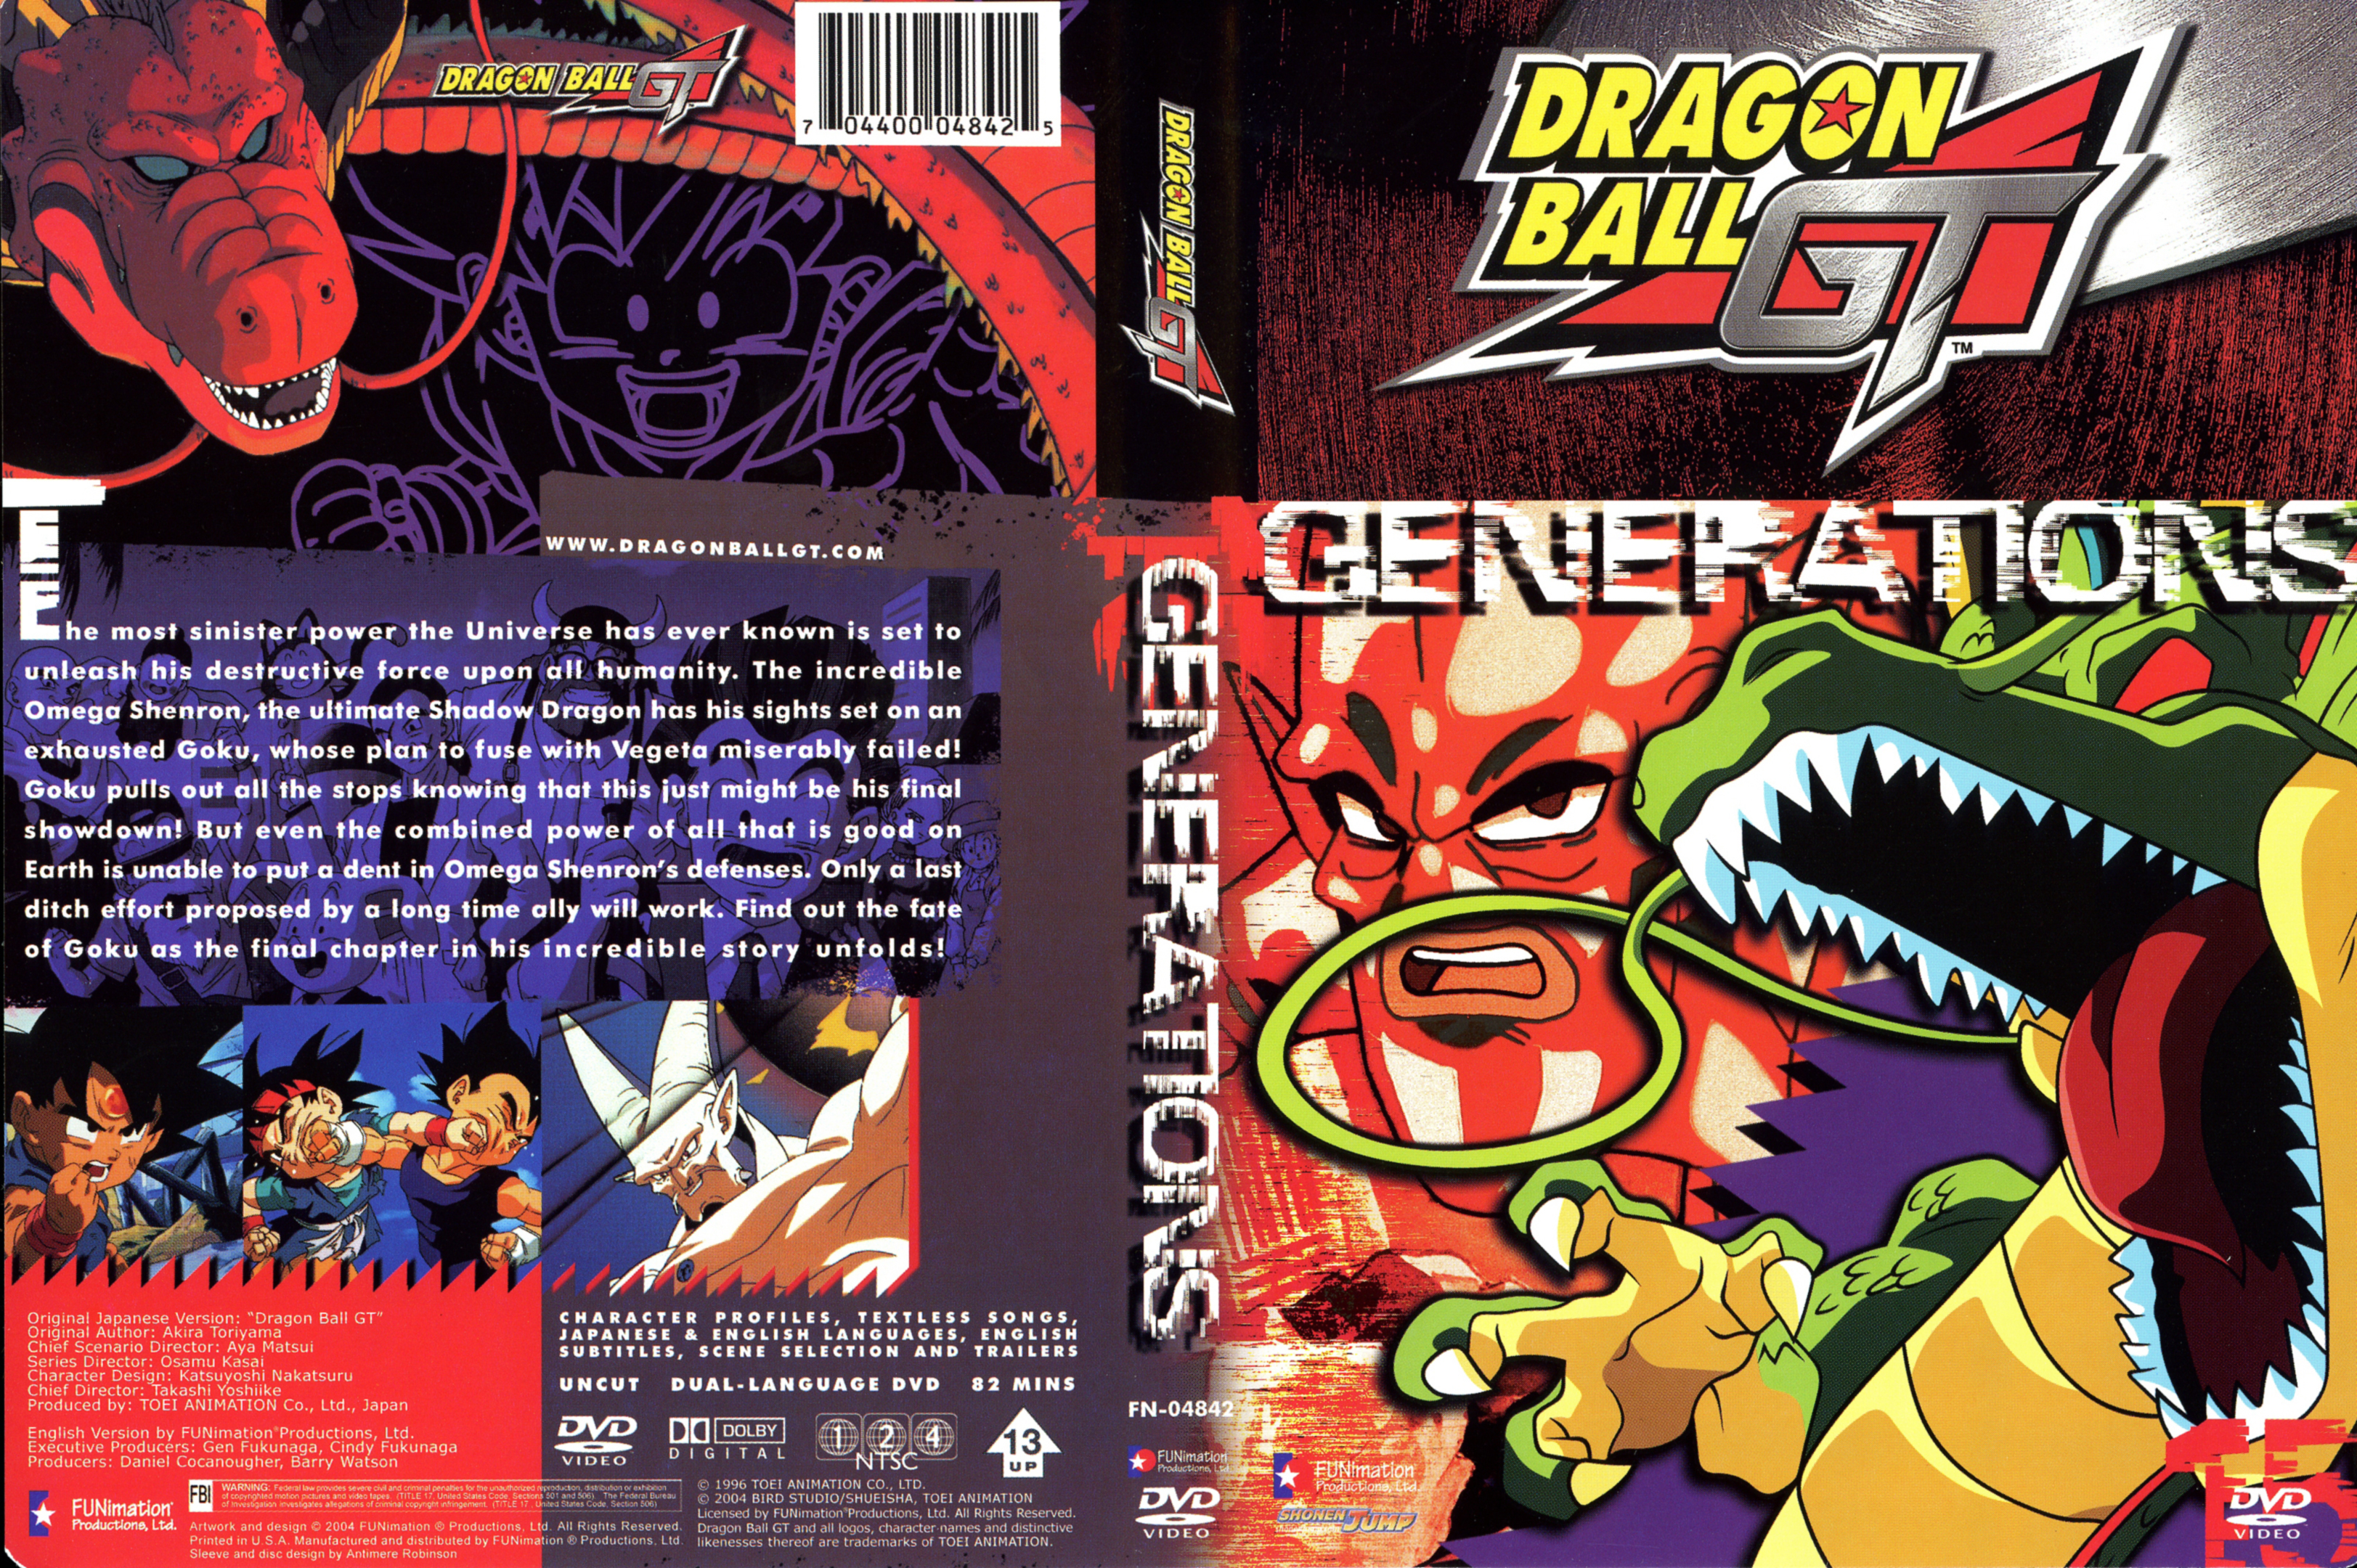 Dragon Ball Gt Generations Dvd Covers Cover Century Over 500 000 Album Art Covers For Free